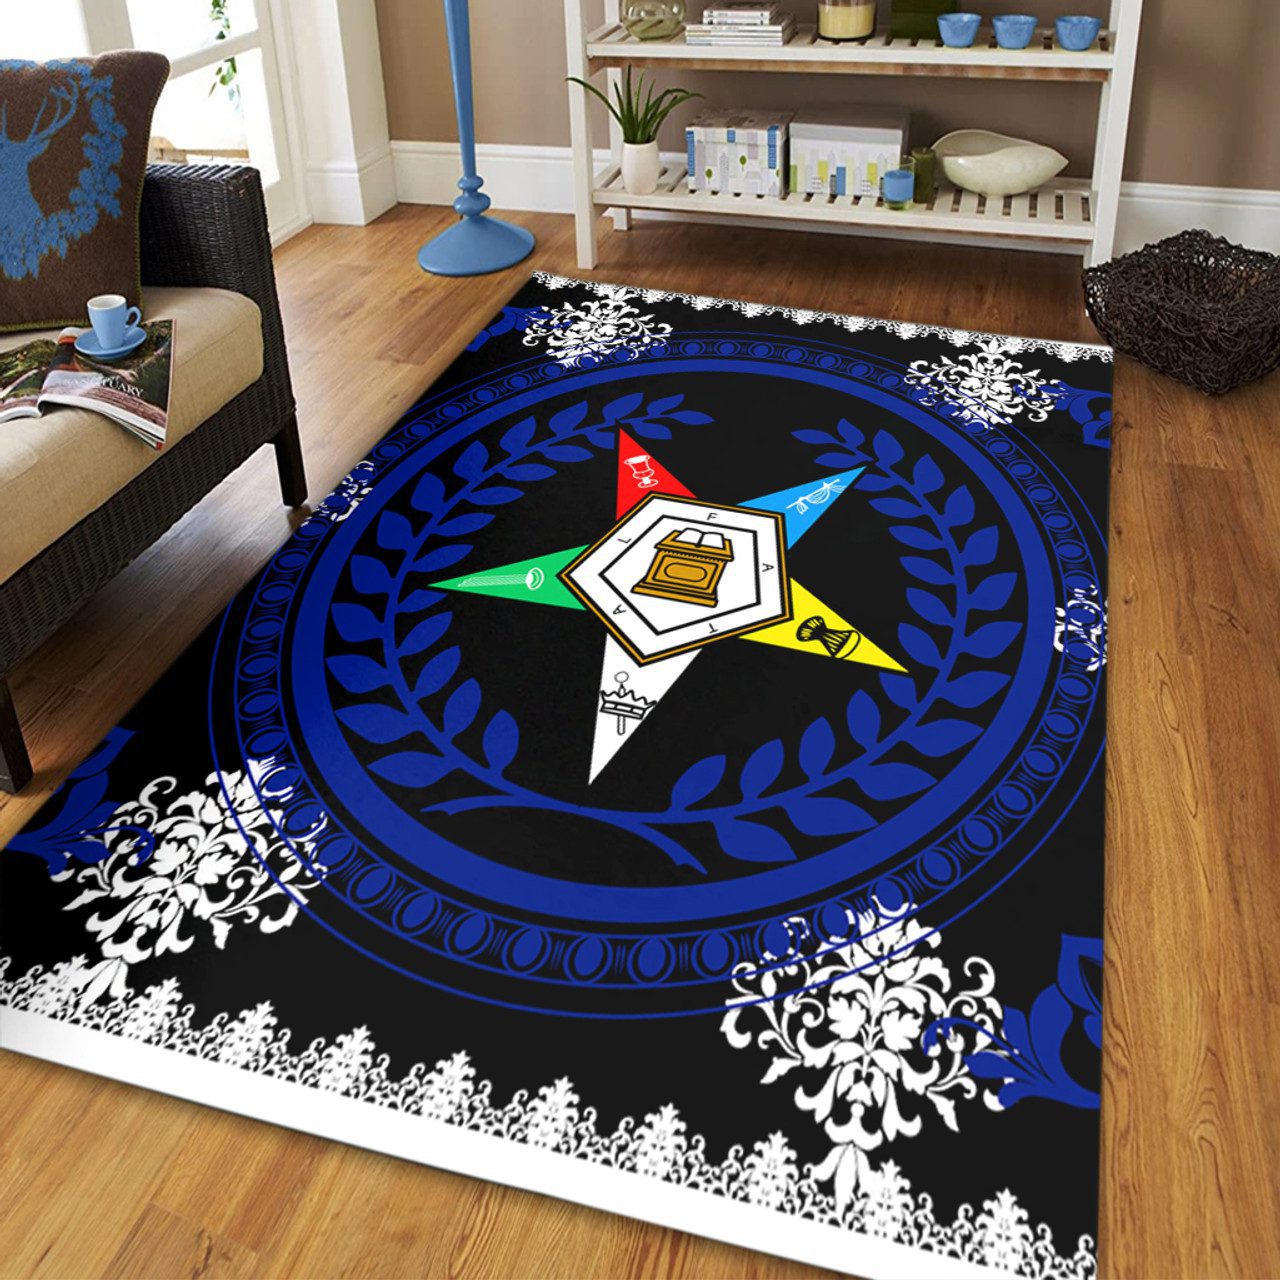 Order of the Eastern Star Area Rug Floral Circle